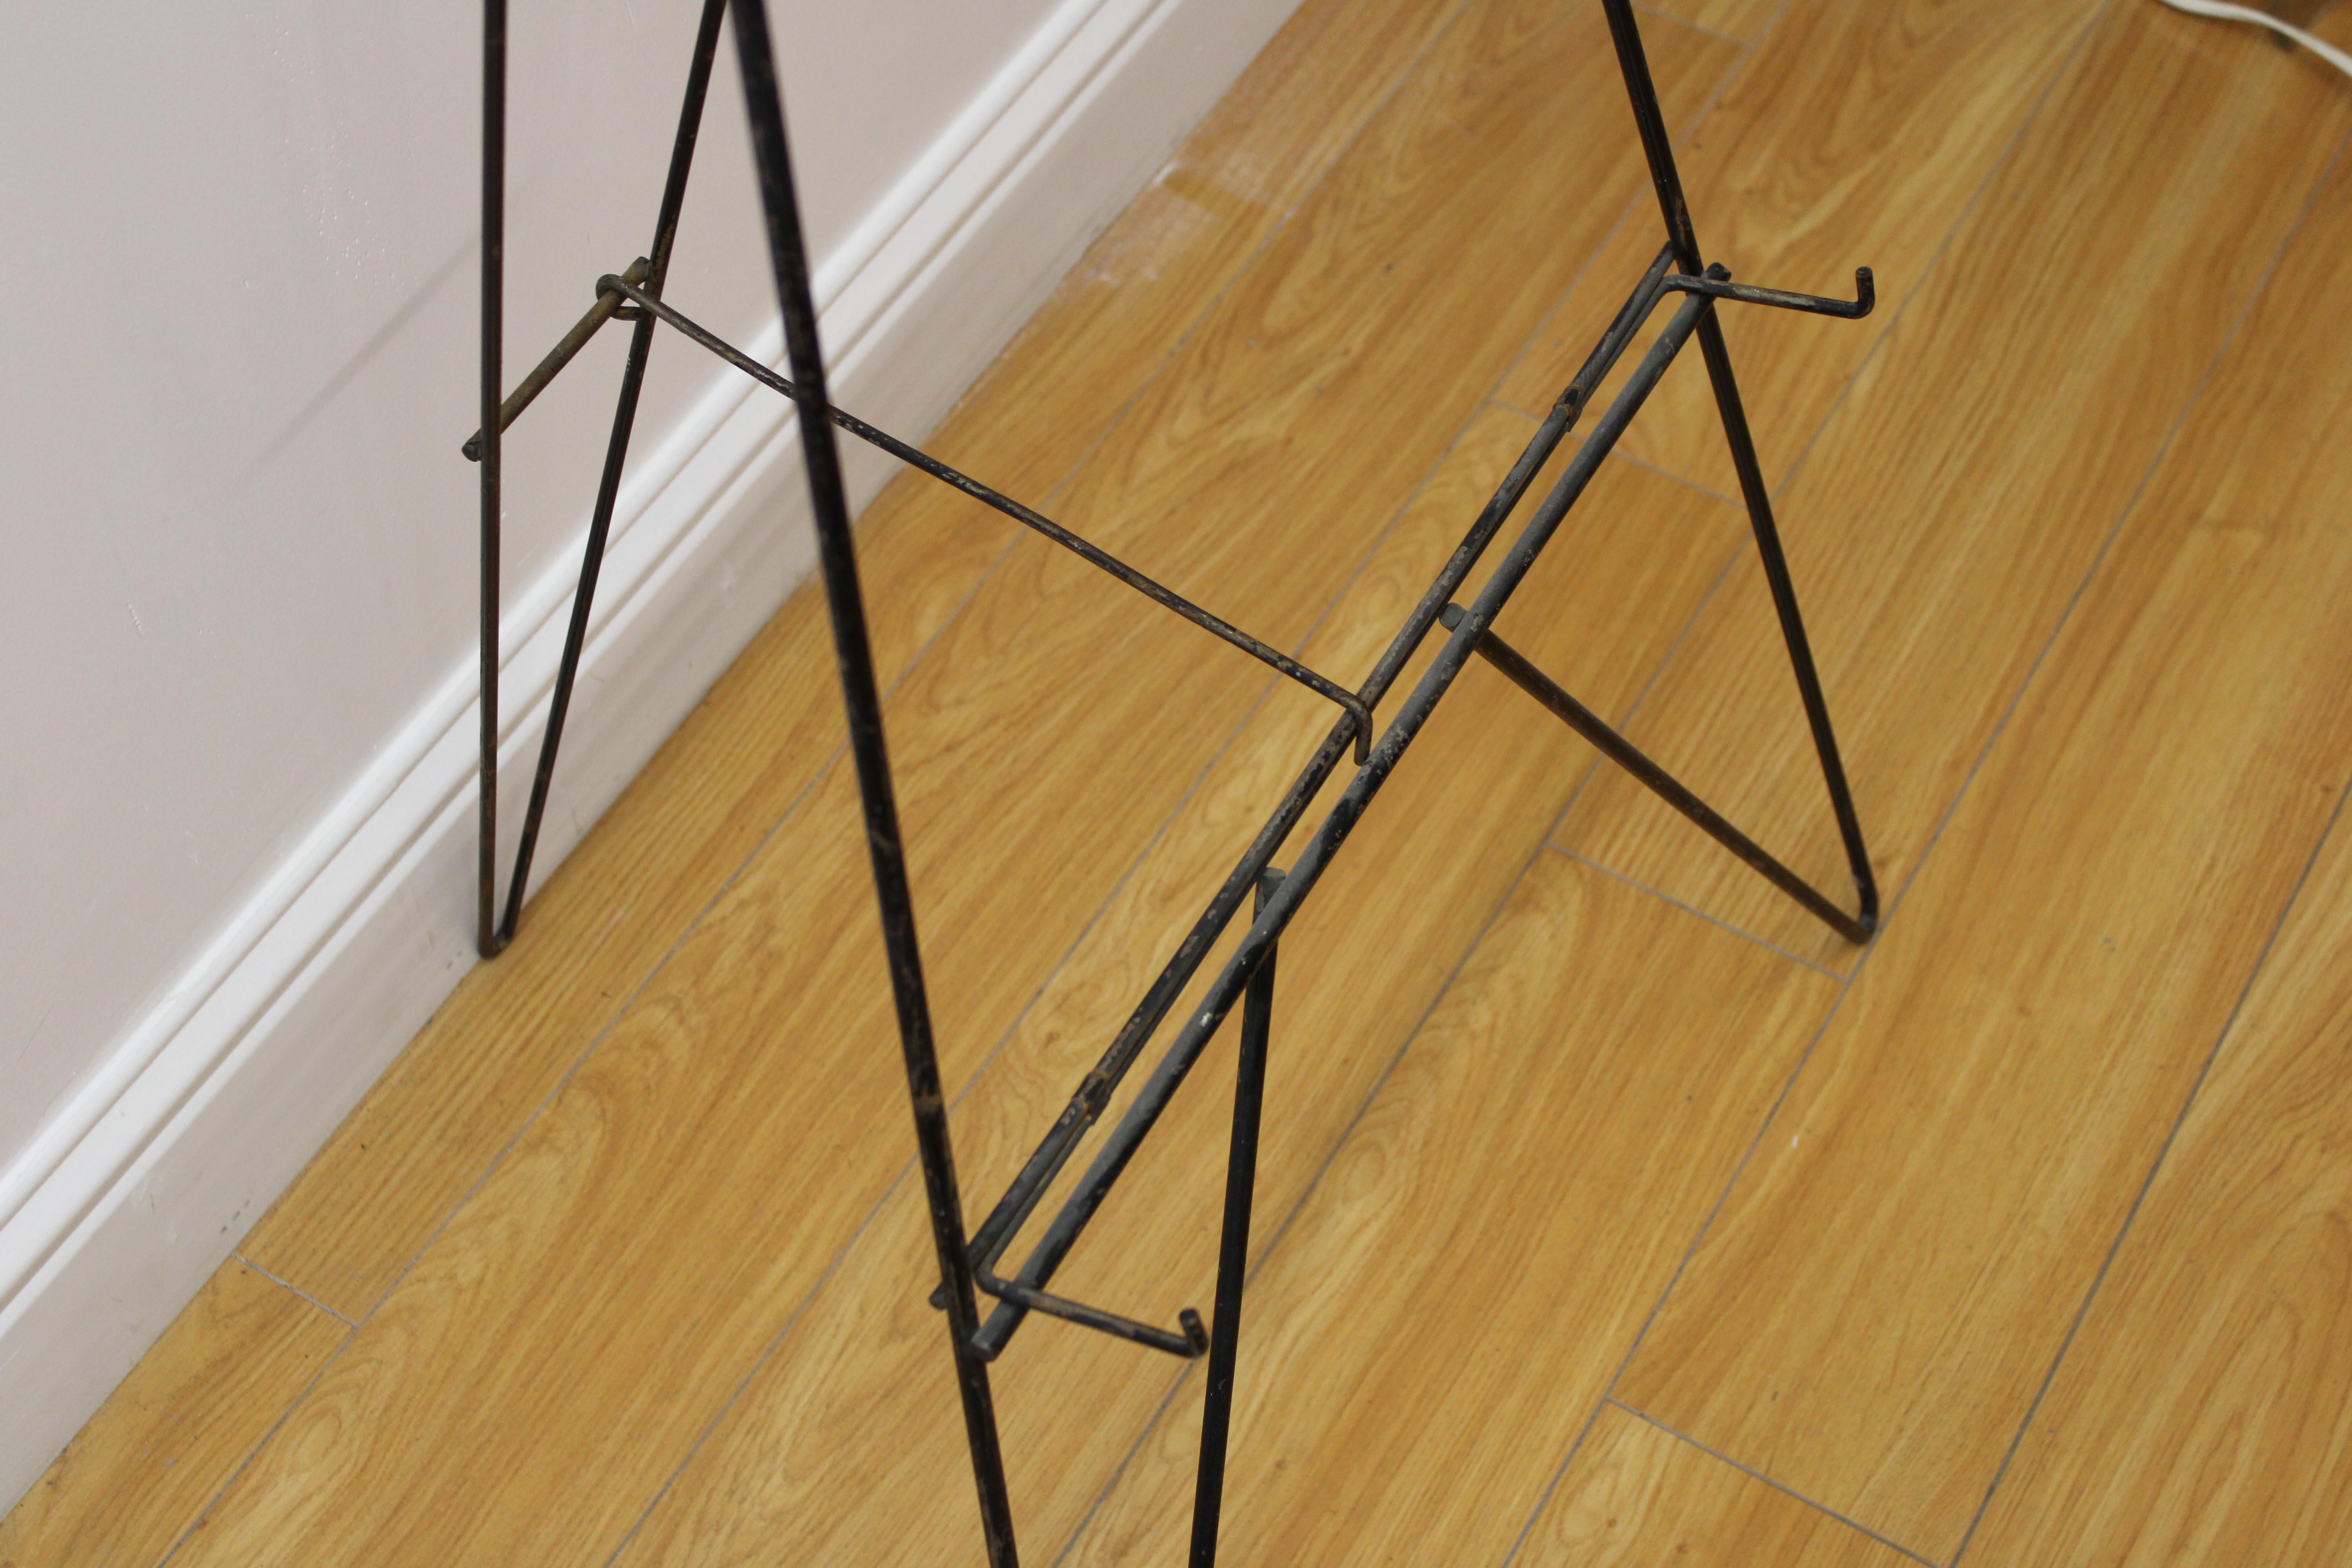 C. Early 20th Century

Sturdy Strong Iron Easel w/ Tri Circular Top.